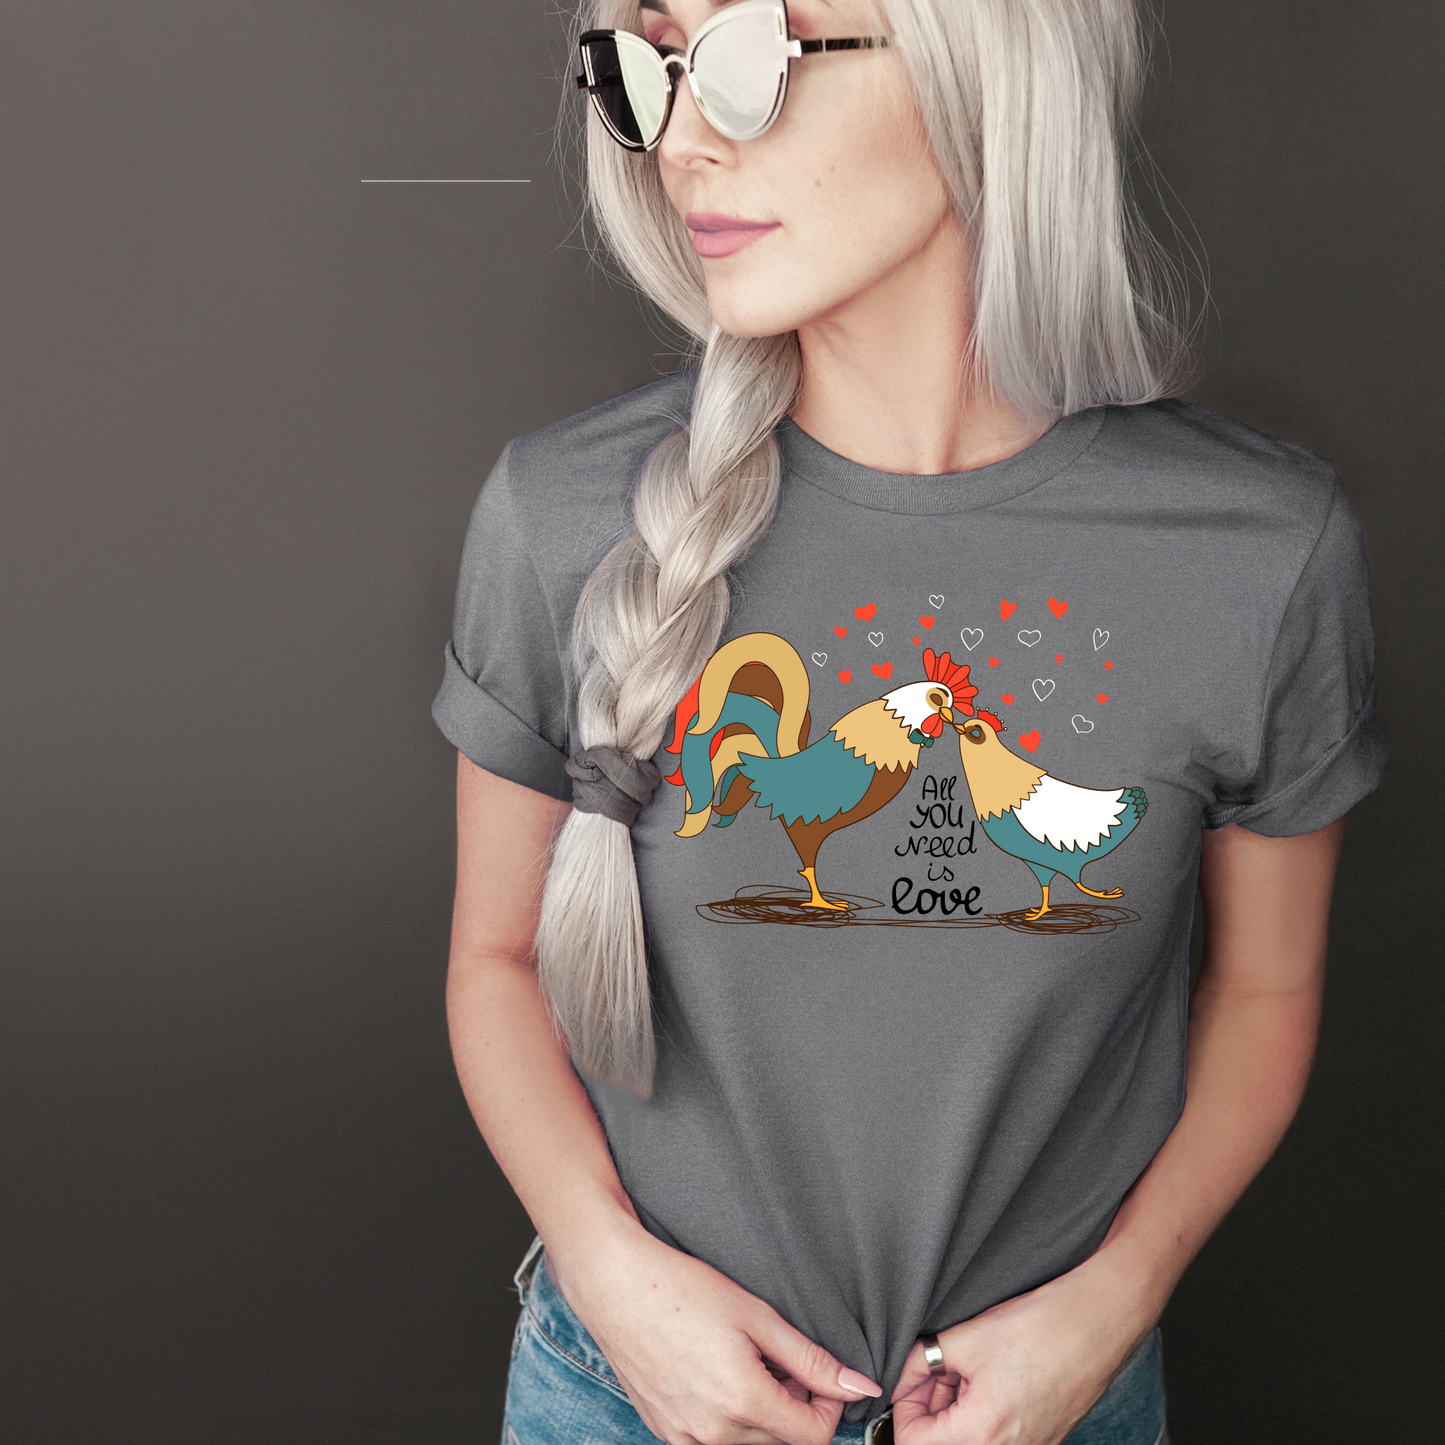 All You Need is Love (and Chickens) - Chicken Tee